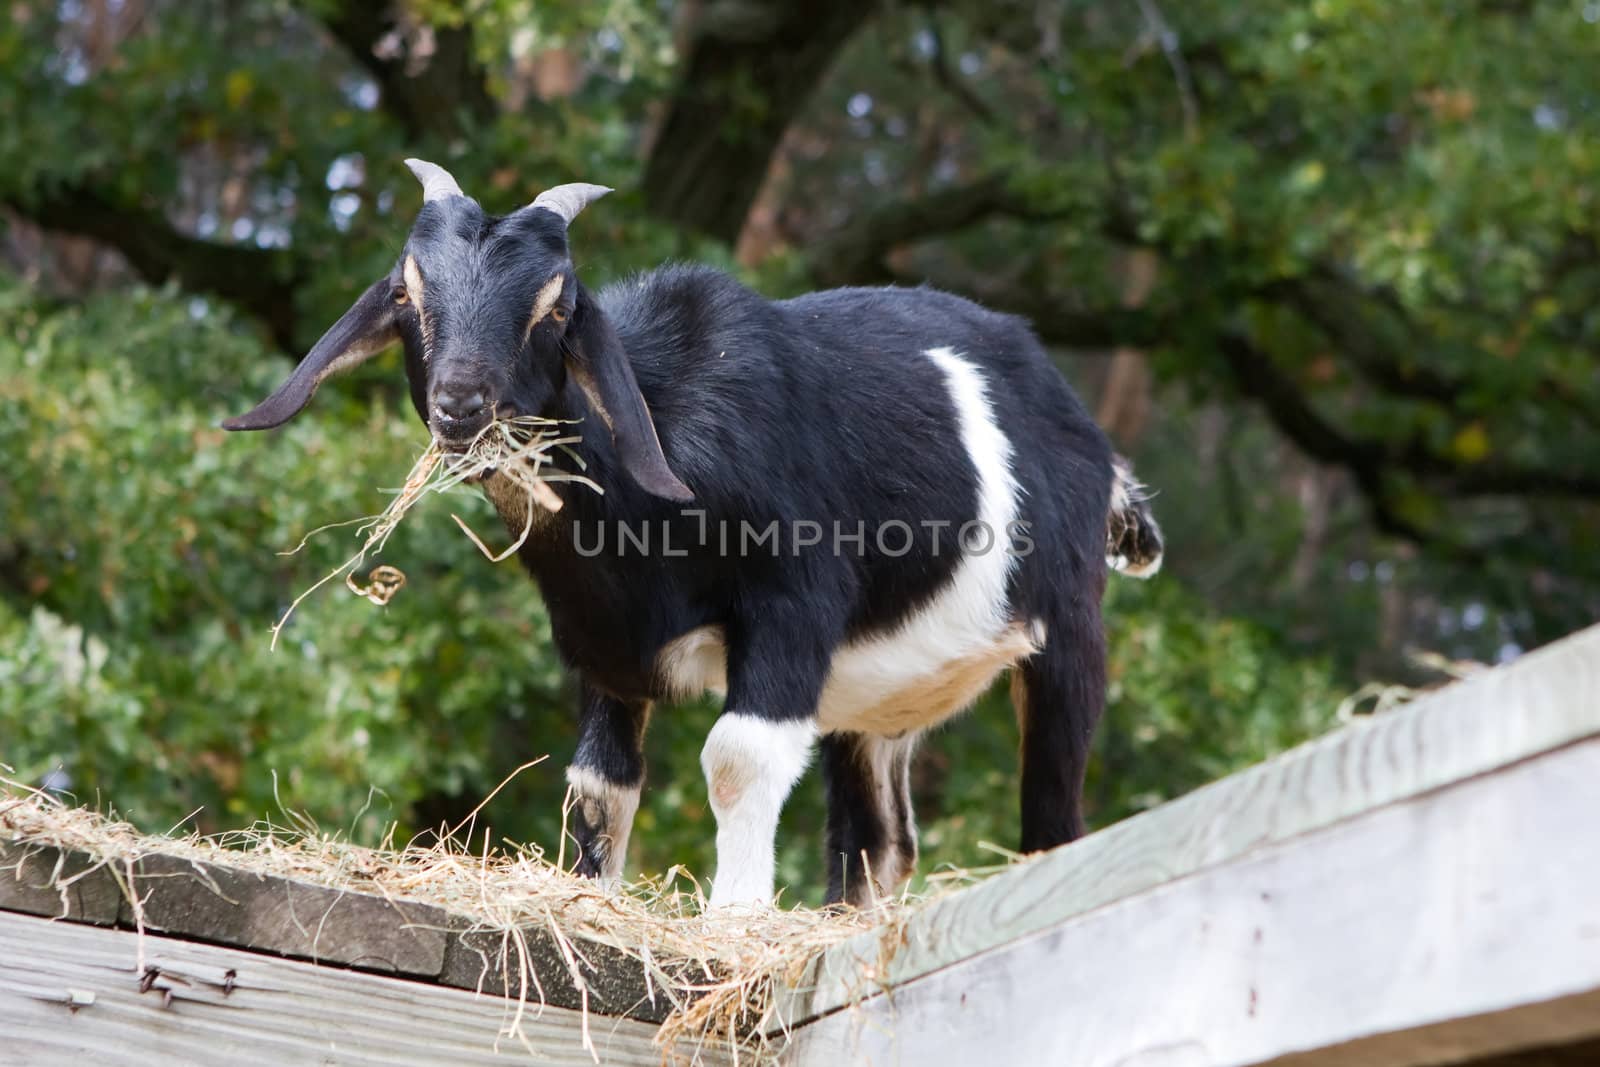 Black and White Goat standing on a loft eating.